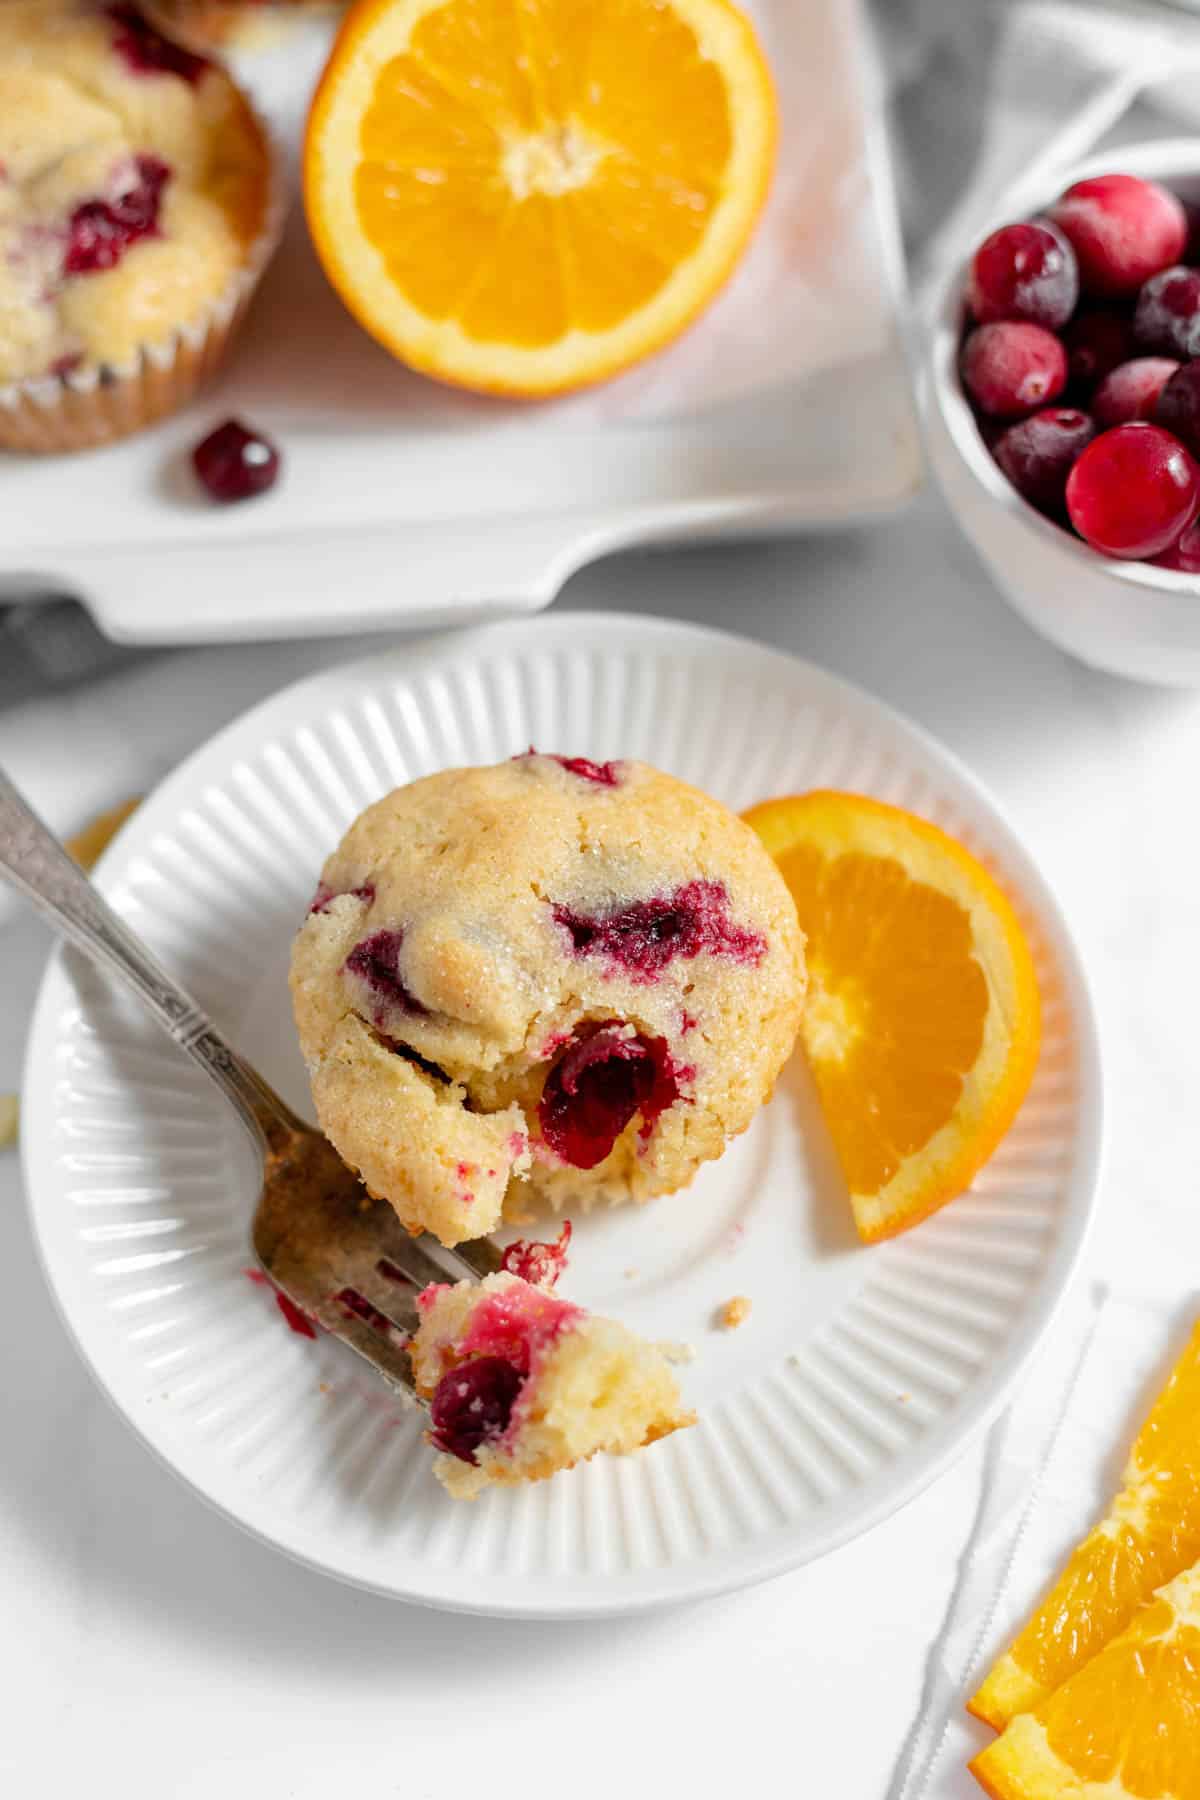 A cranberry orange muffin on a white plate with a fork with a bite of muffin on it and a slice of orange.